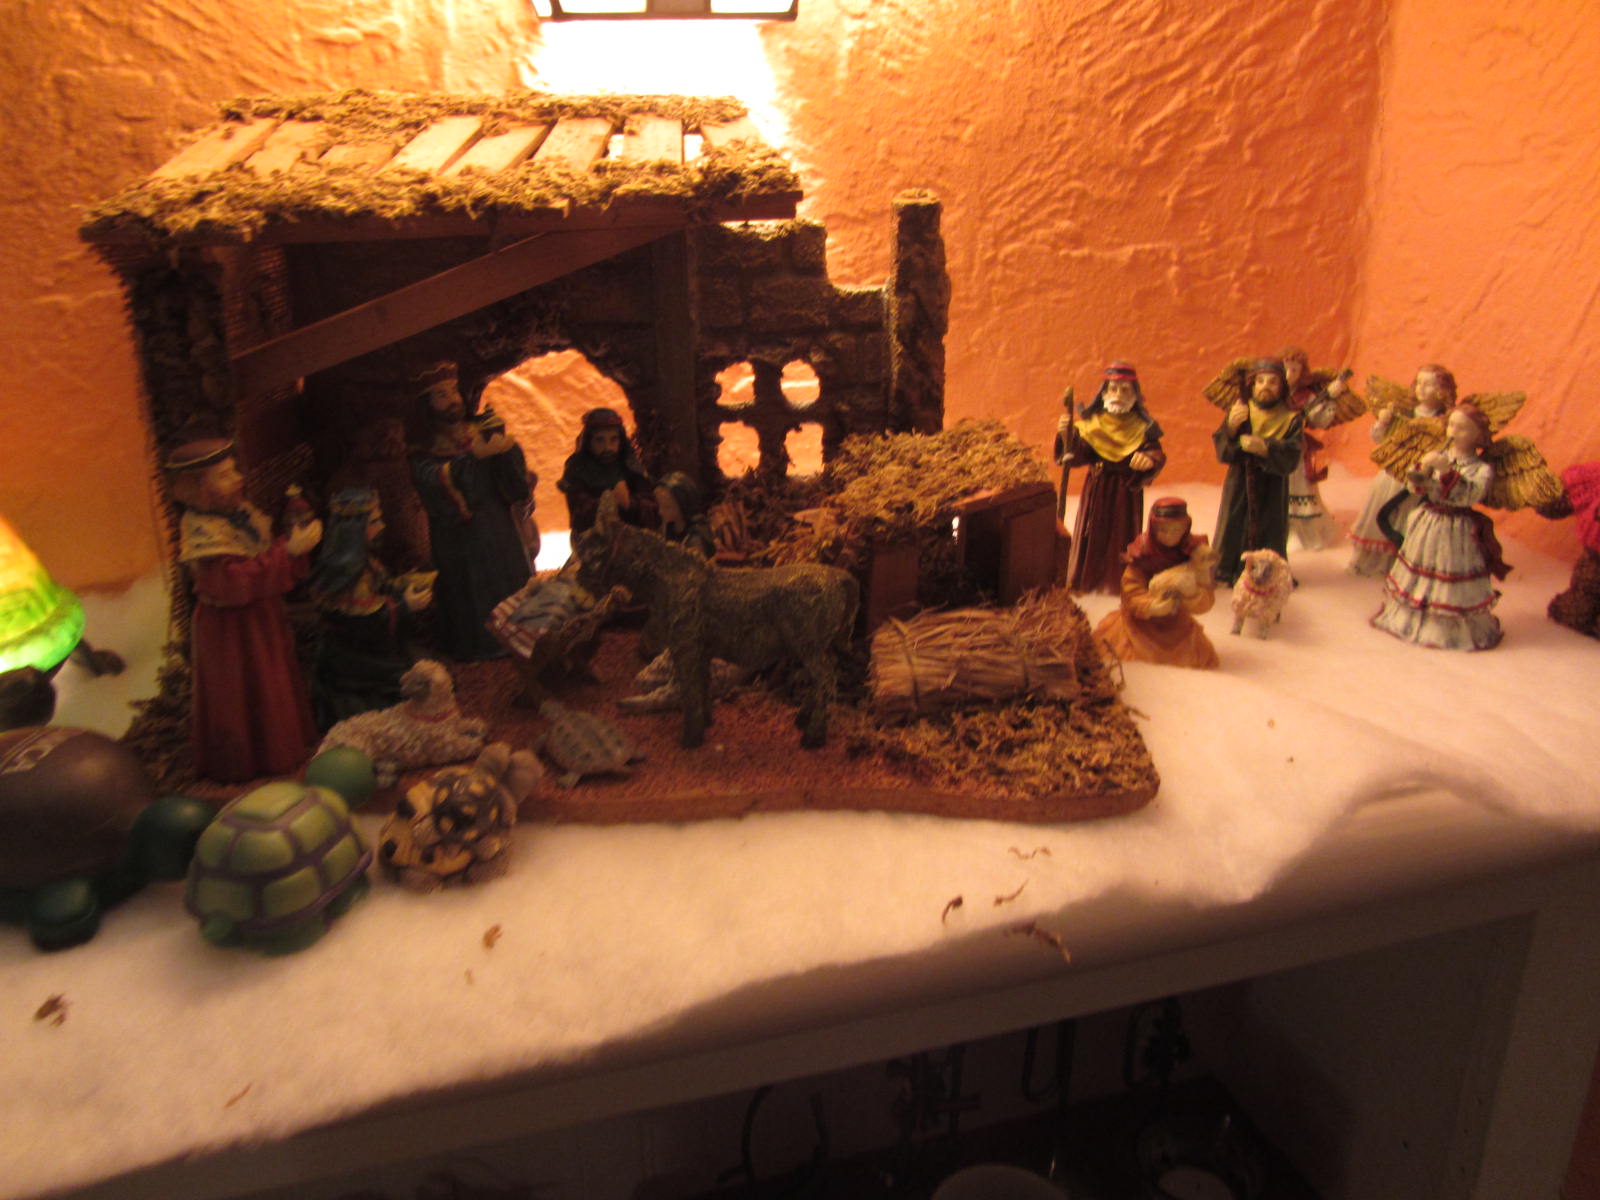 a group of toys in a nativity scene on a table